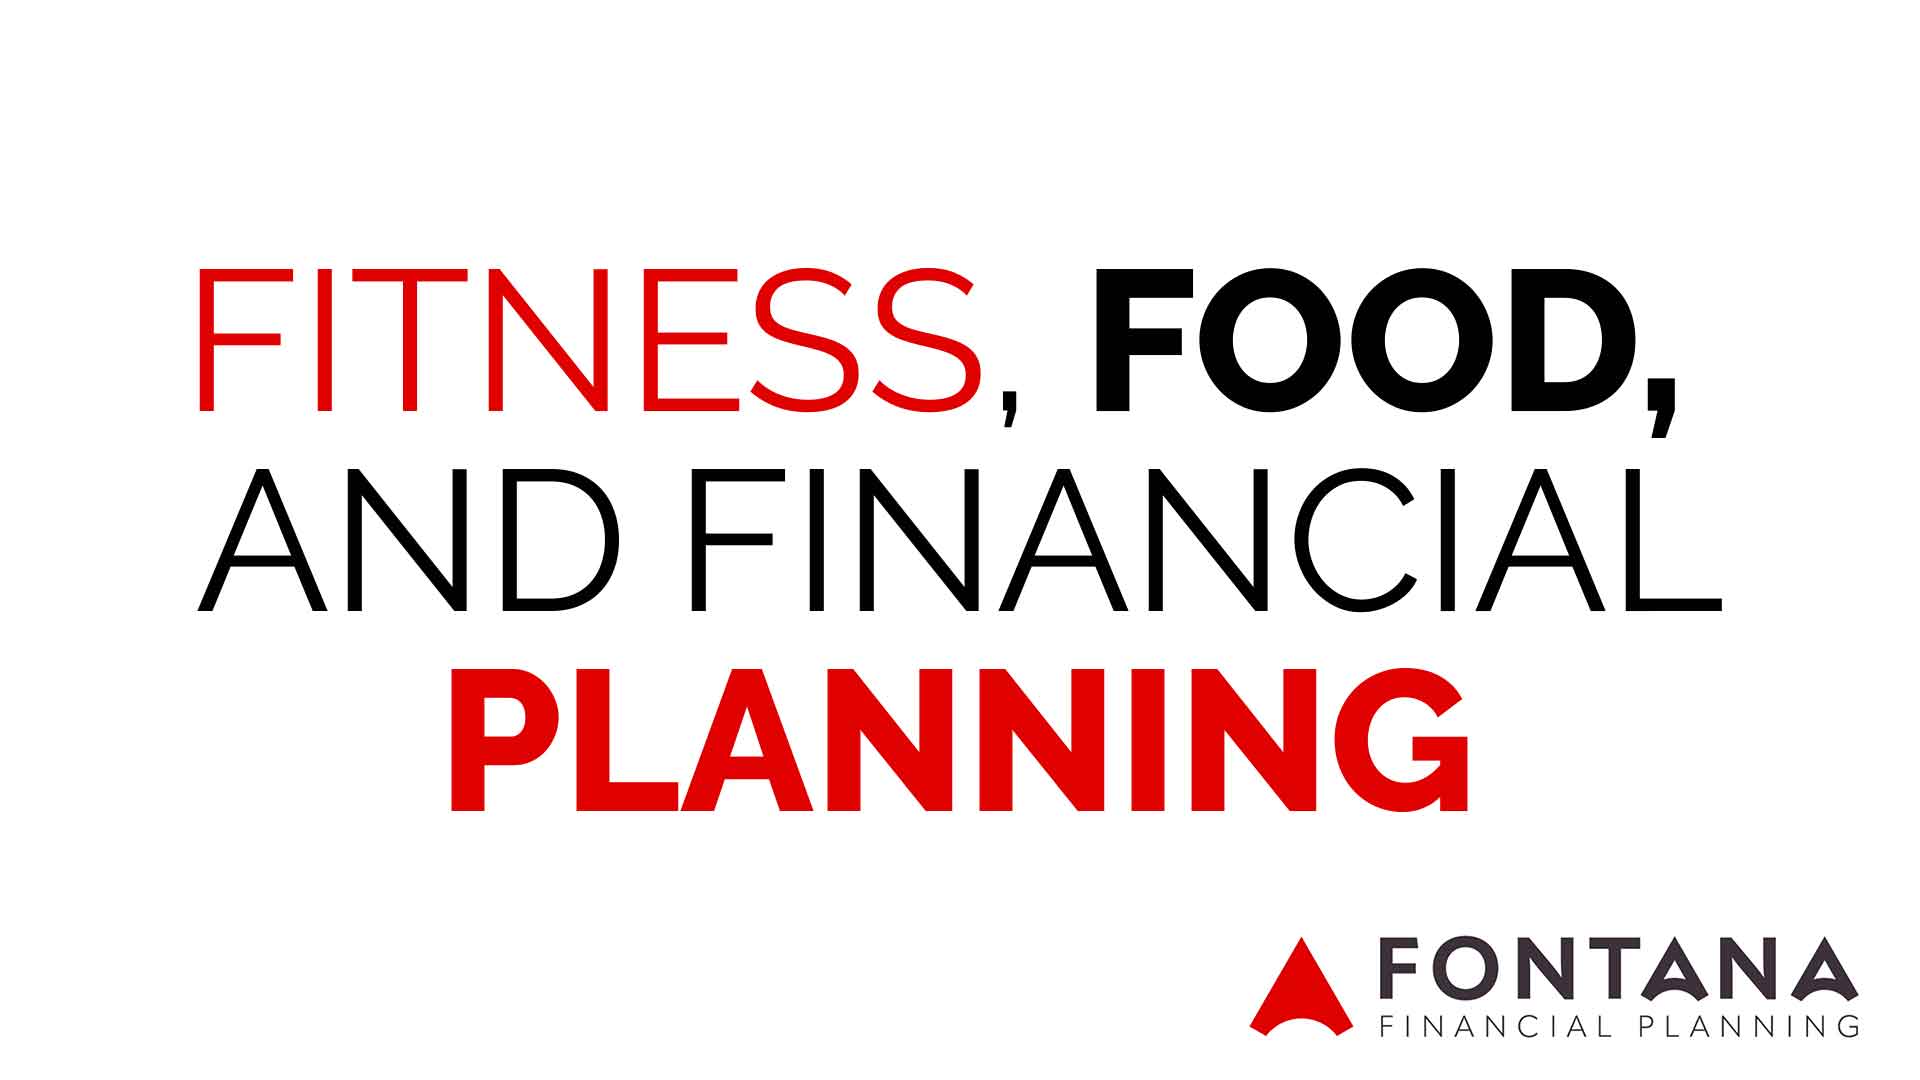 Fitness, Food, and Financial Planning